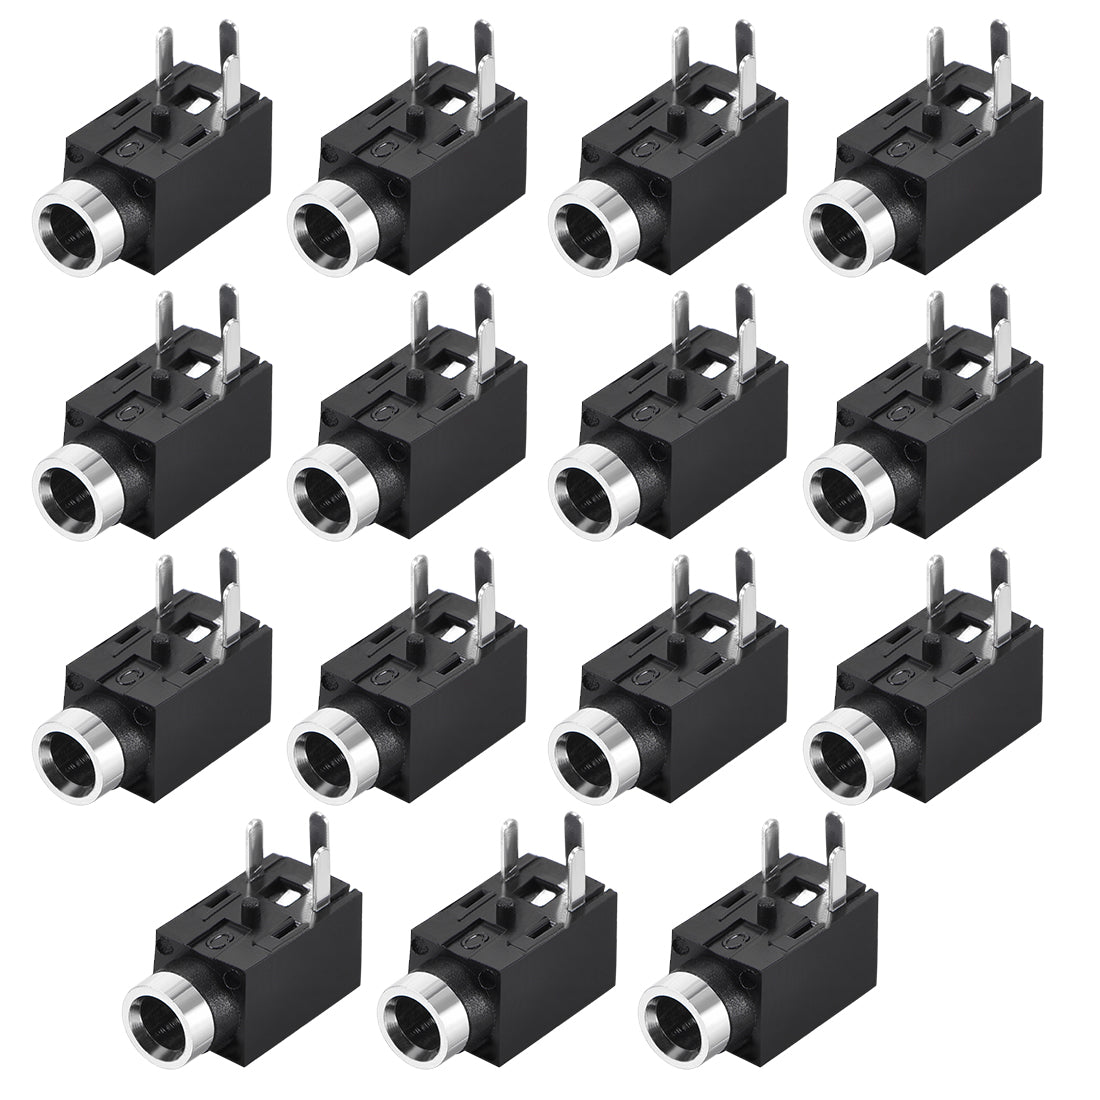 uxcell Uxcell PCB Mount 2.5mm 3 Pin Socket Headphone Stereo Jack Audio Video Connector PJ210 Black 15Pcs